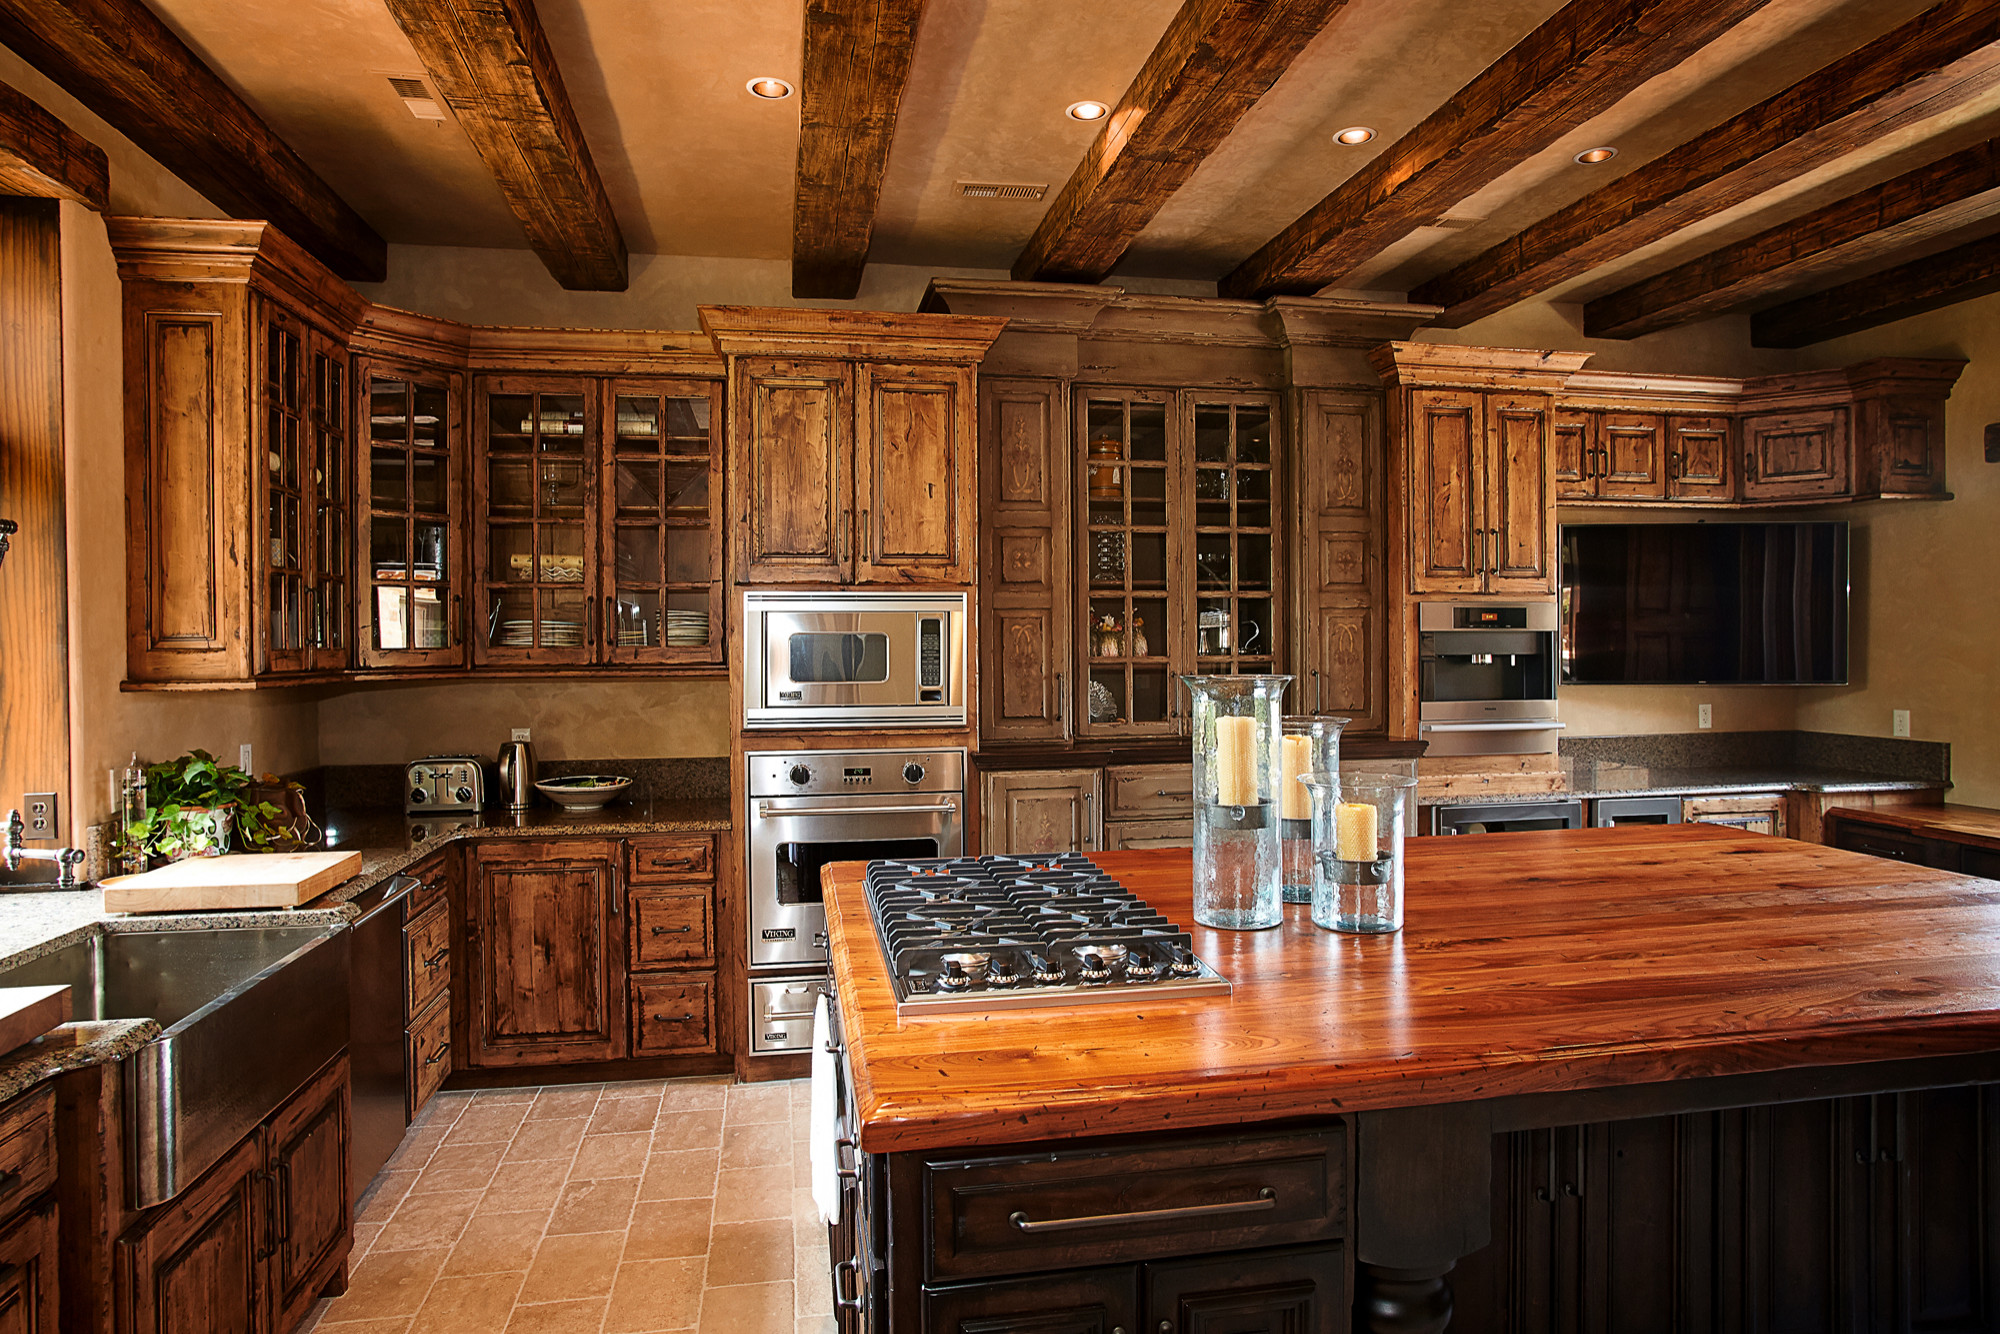 https://st.hzcdn.com/simgs/pictures/kitchens/rustic-beams-cabinets-custom-wood-products-custom-wood-products-handcrafted-cabinets-img~a6e1daef04aea75a_14-6720-1-8858eb7.jpg